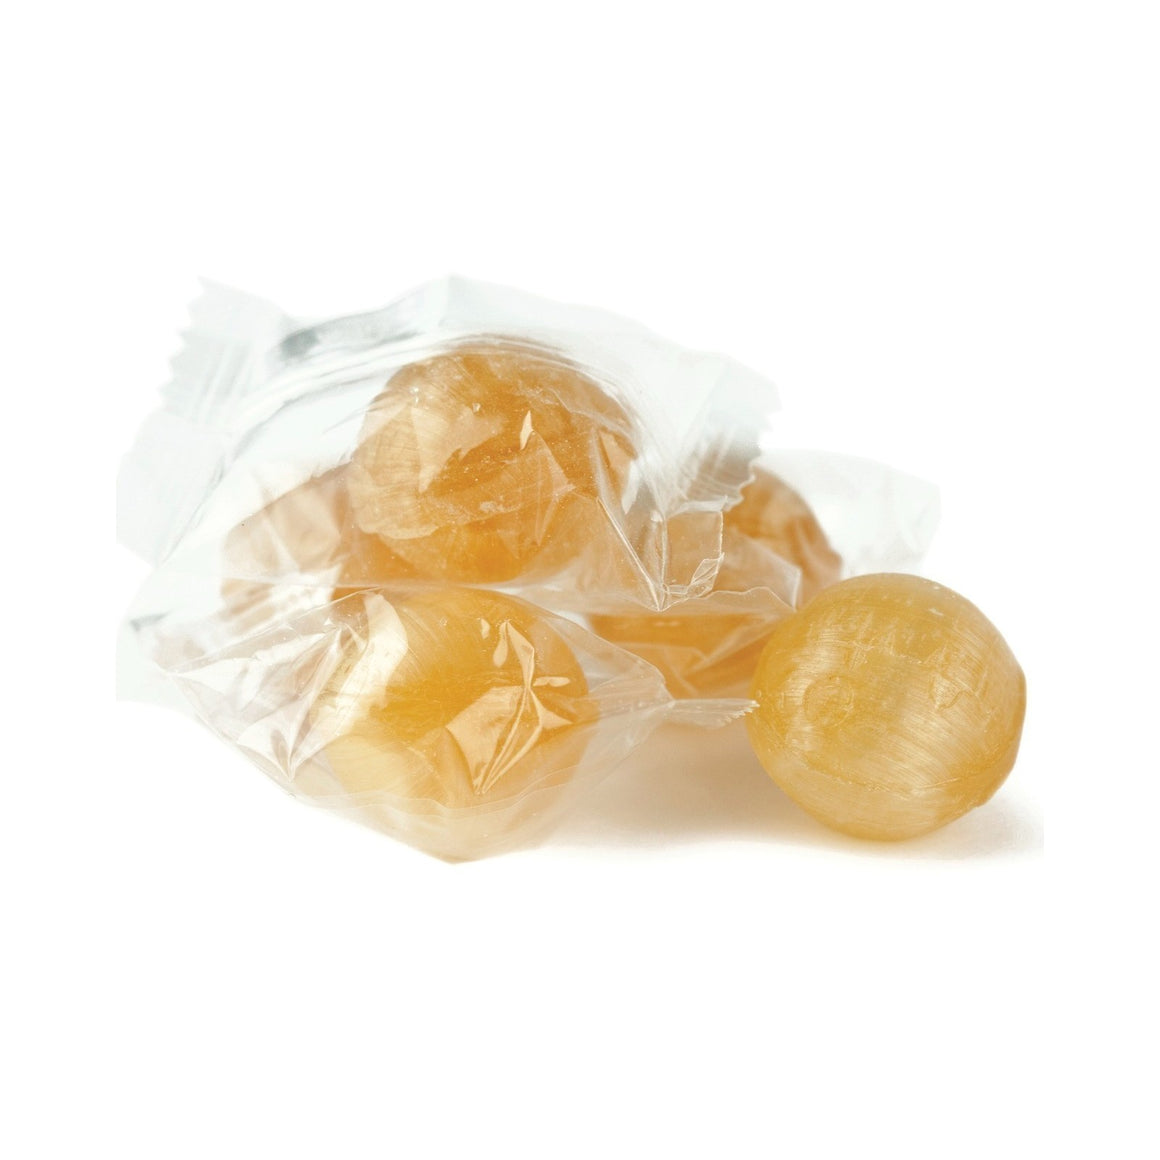 All City Candy Washburn's Ginger Balls Hard Candy - Bulk Bags Bulk Wrapped Washburn Candy For fresh candy and great service, visit www.allcitycandy.com